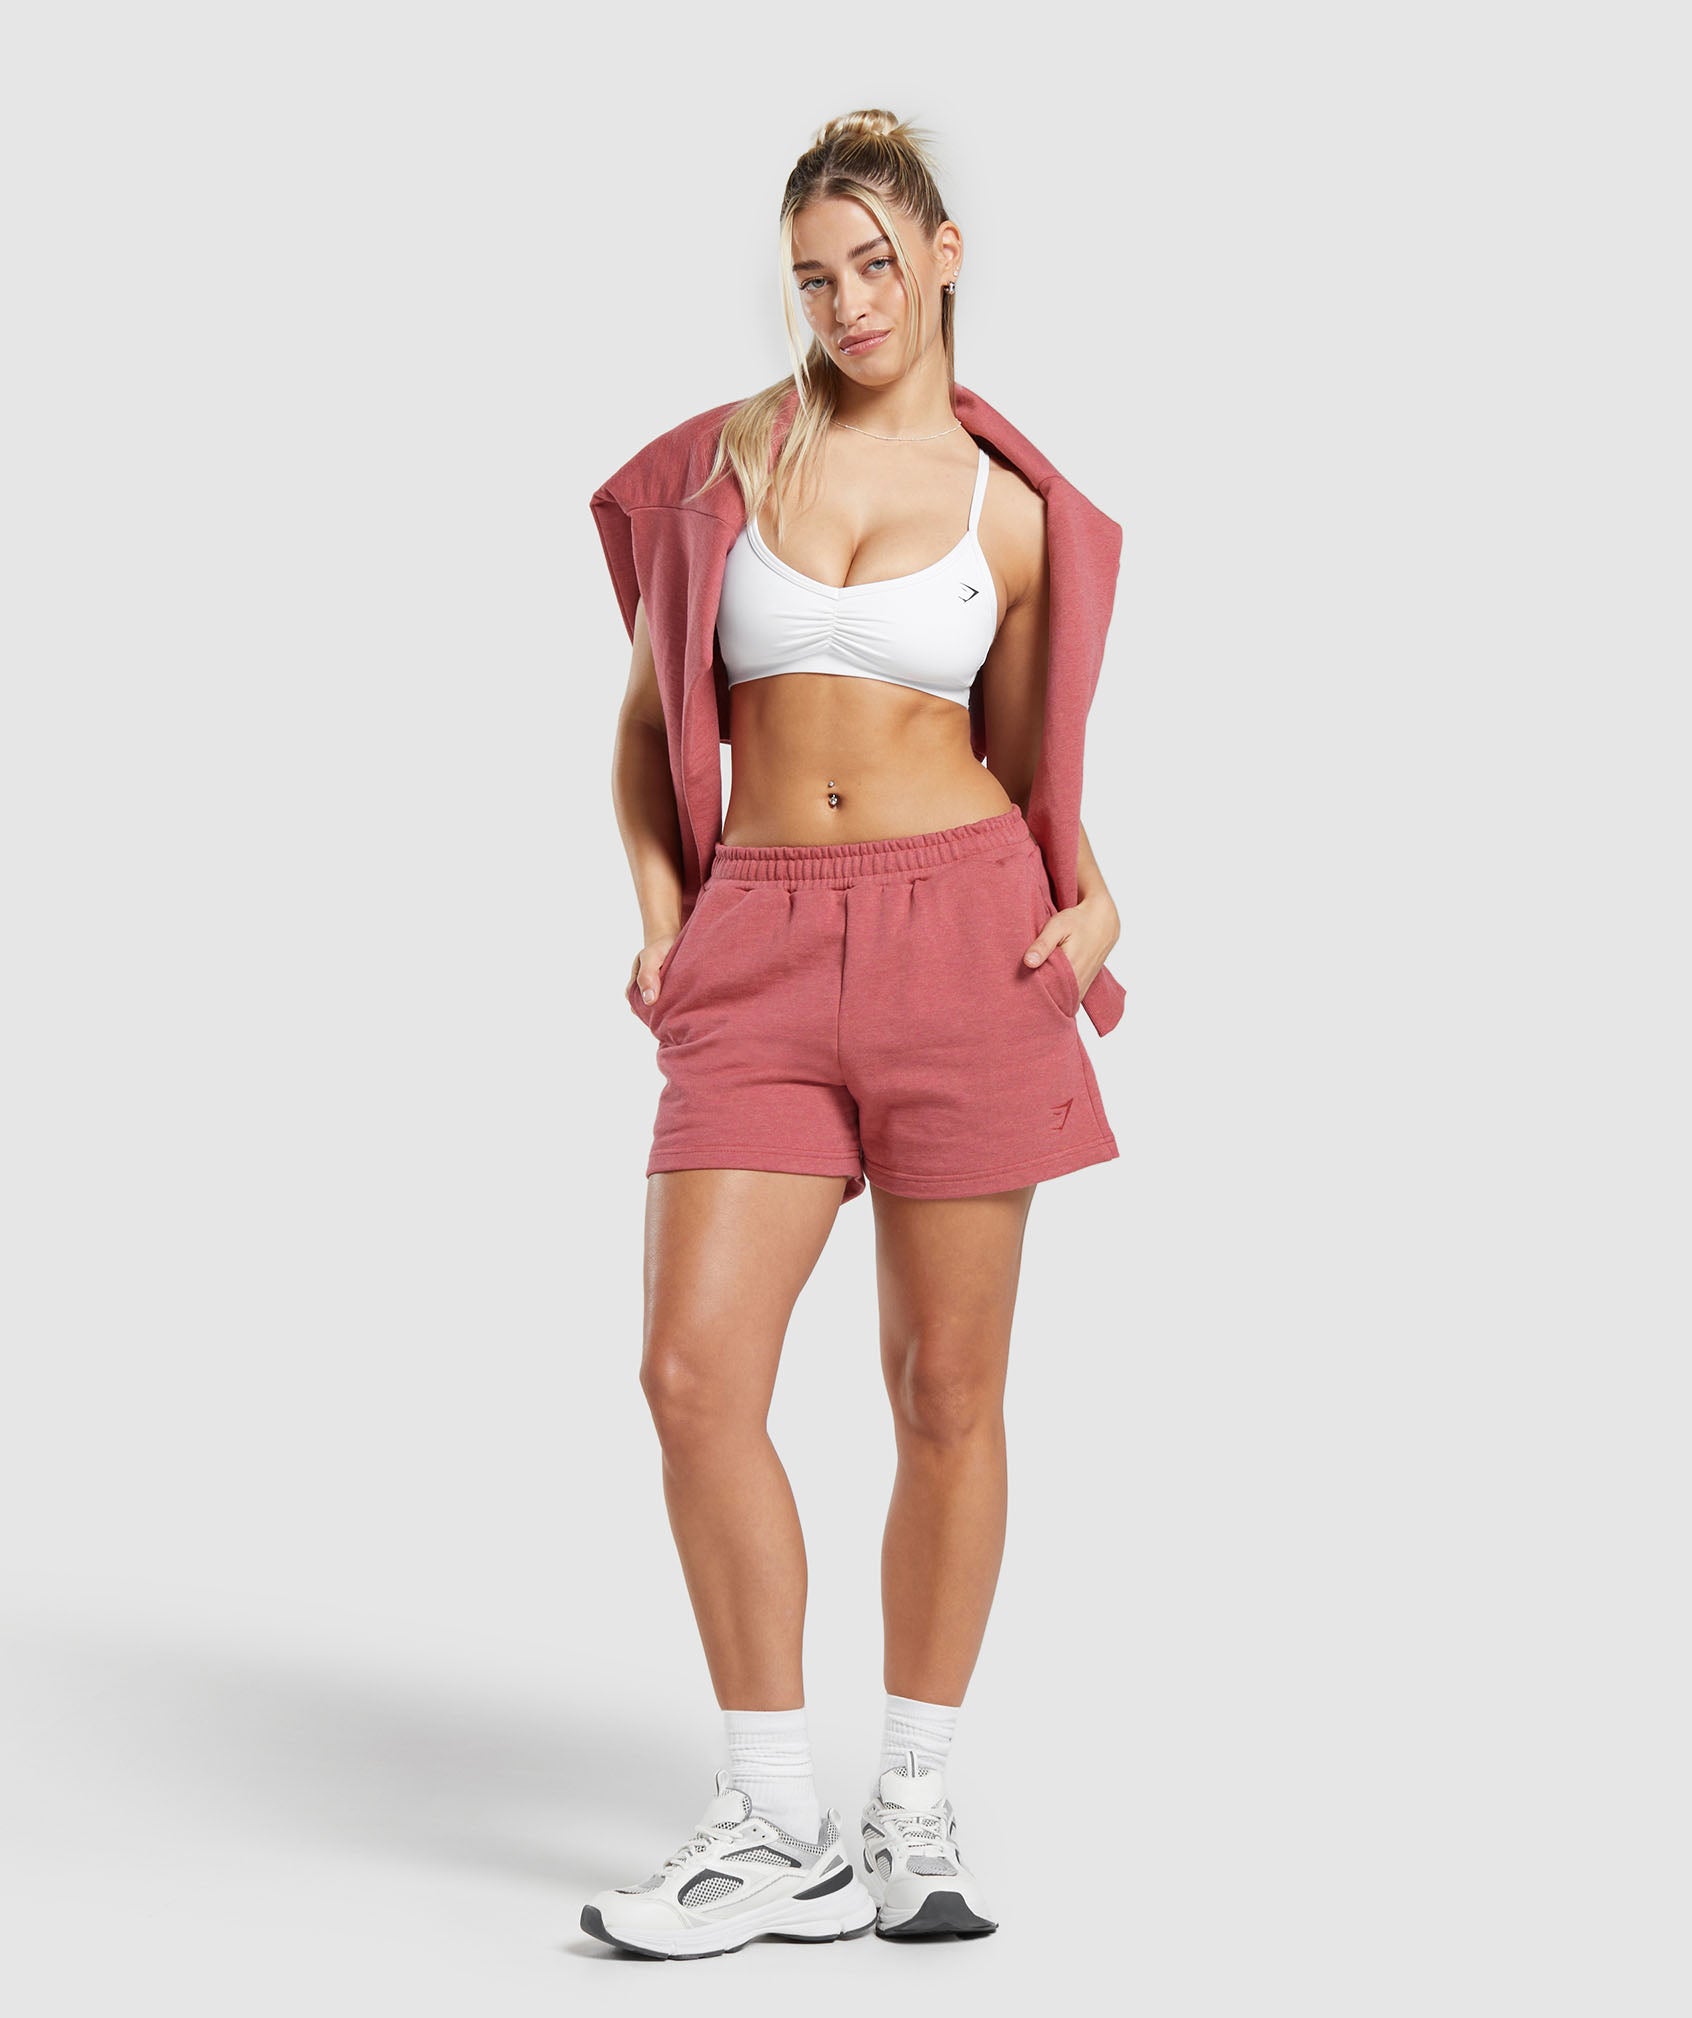 Rest Day Sweat Shorts in Heritage Pink Marl - view 4